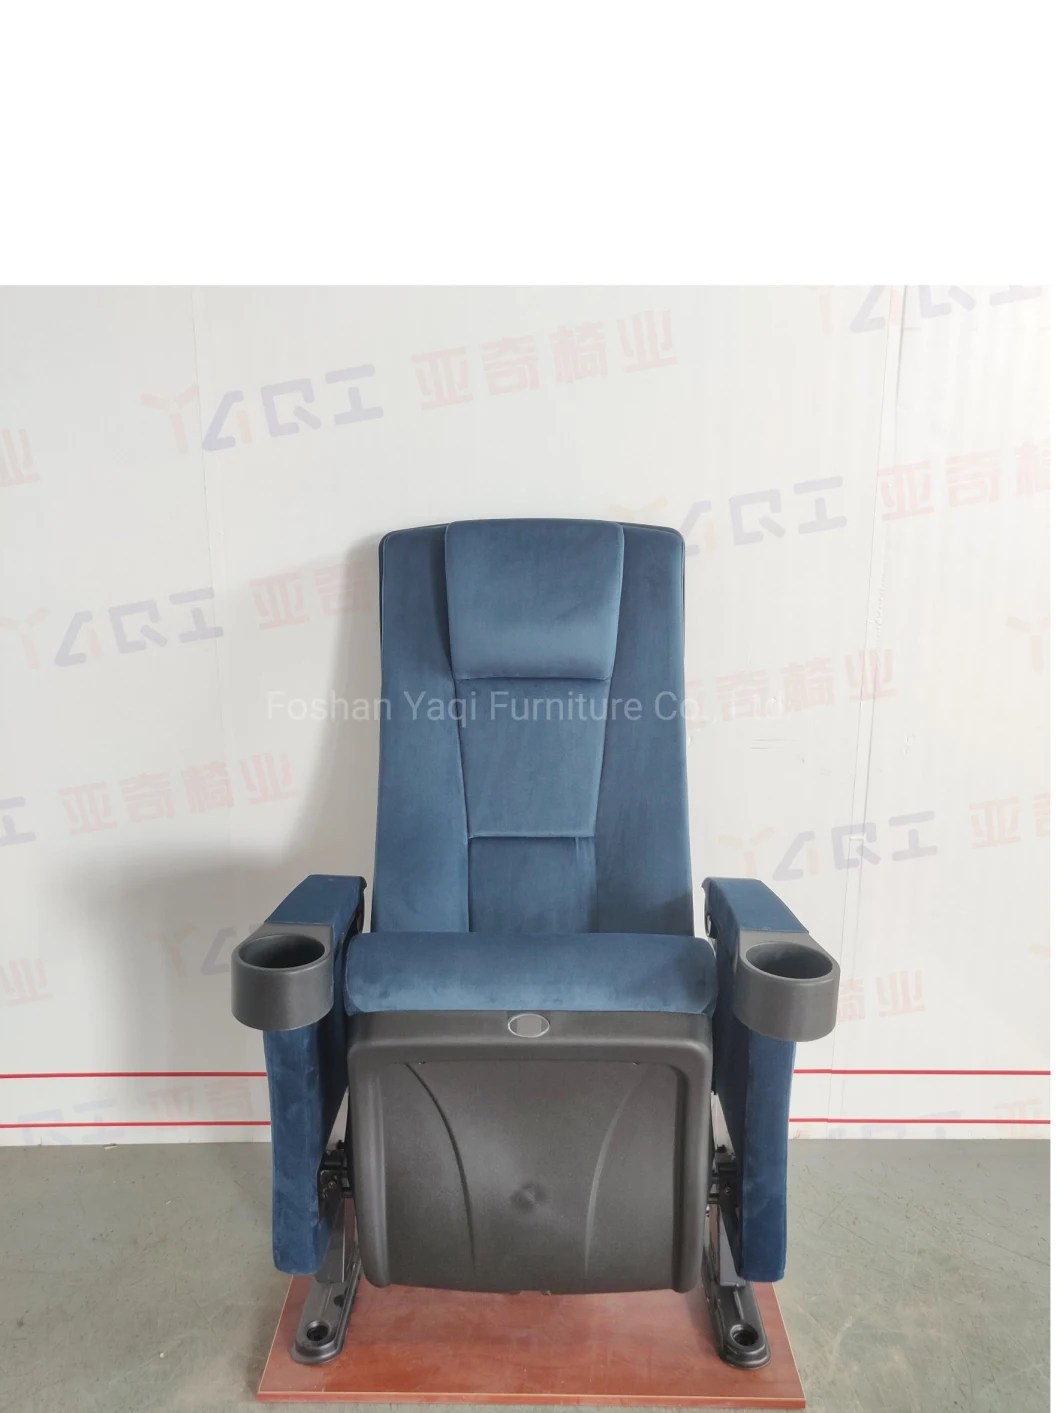 Folding Table Chair for Chair Auditorium (YA-L603AB)